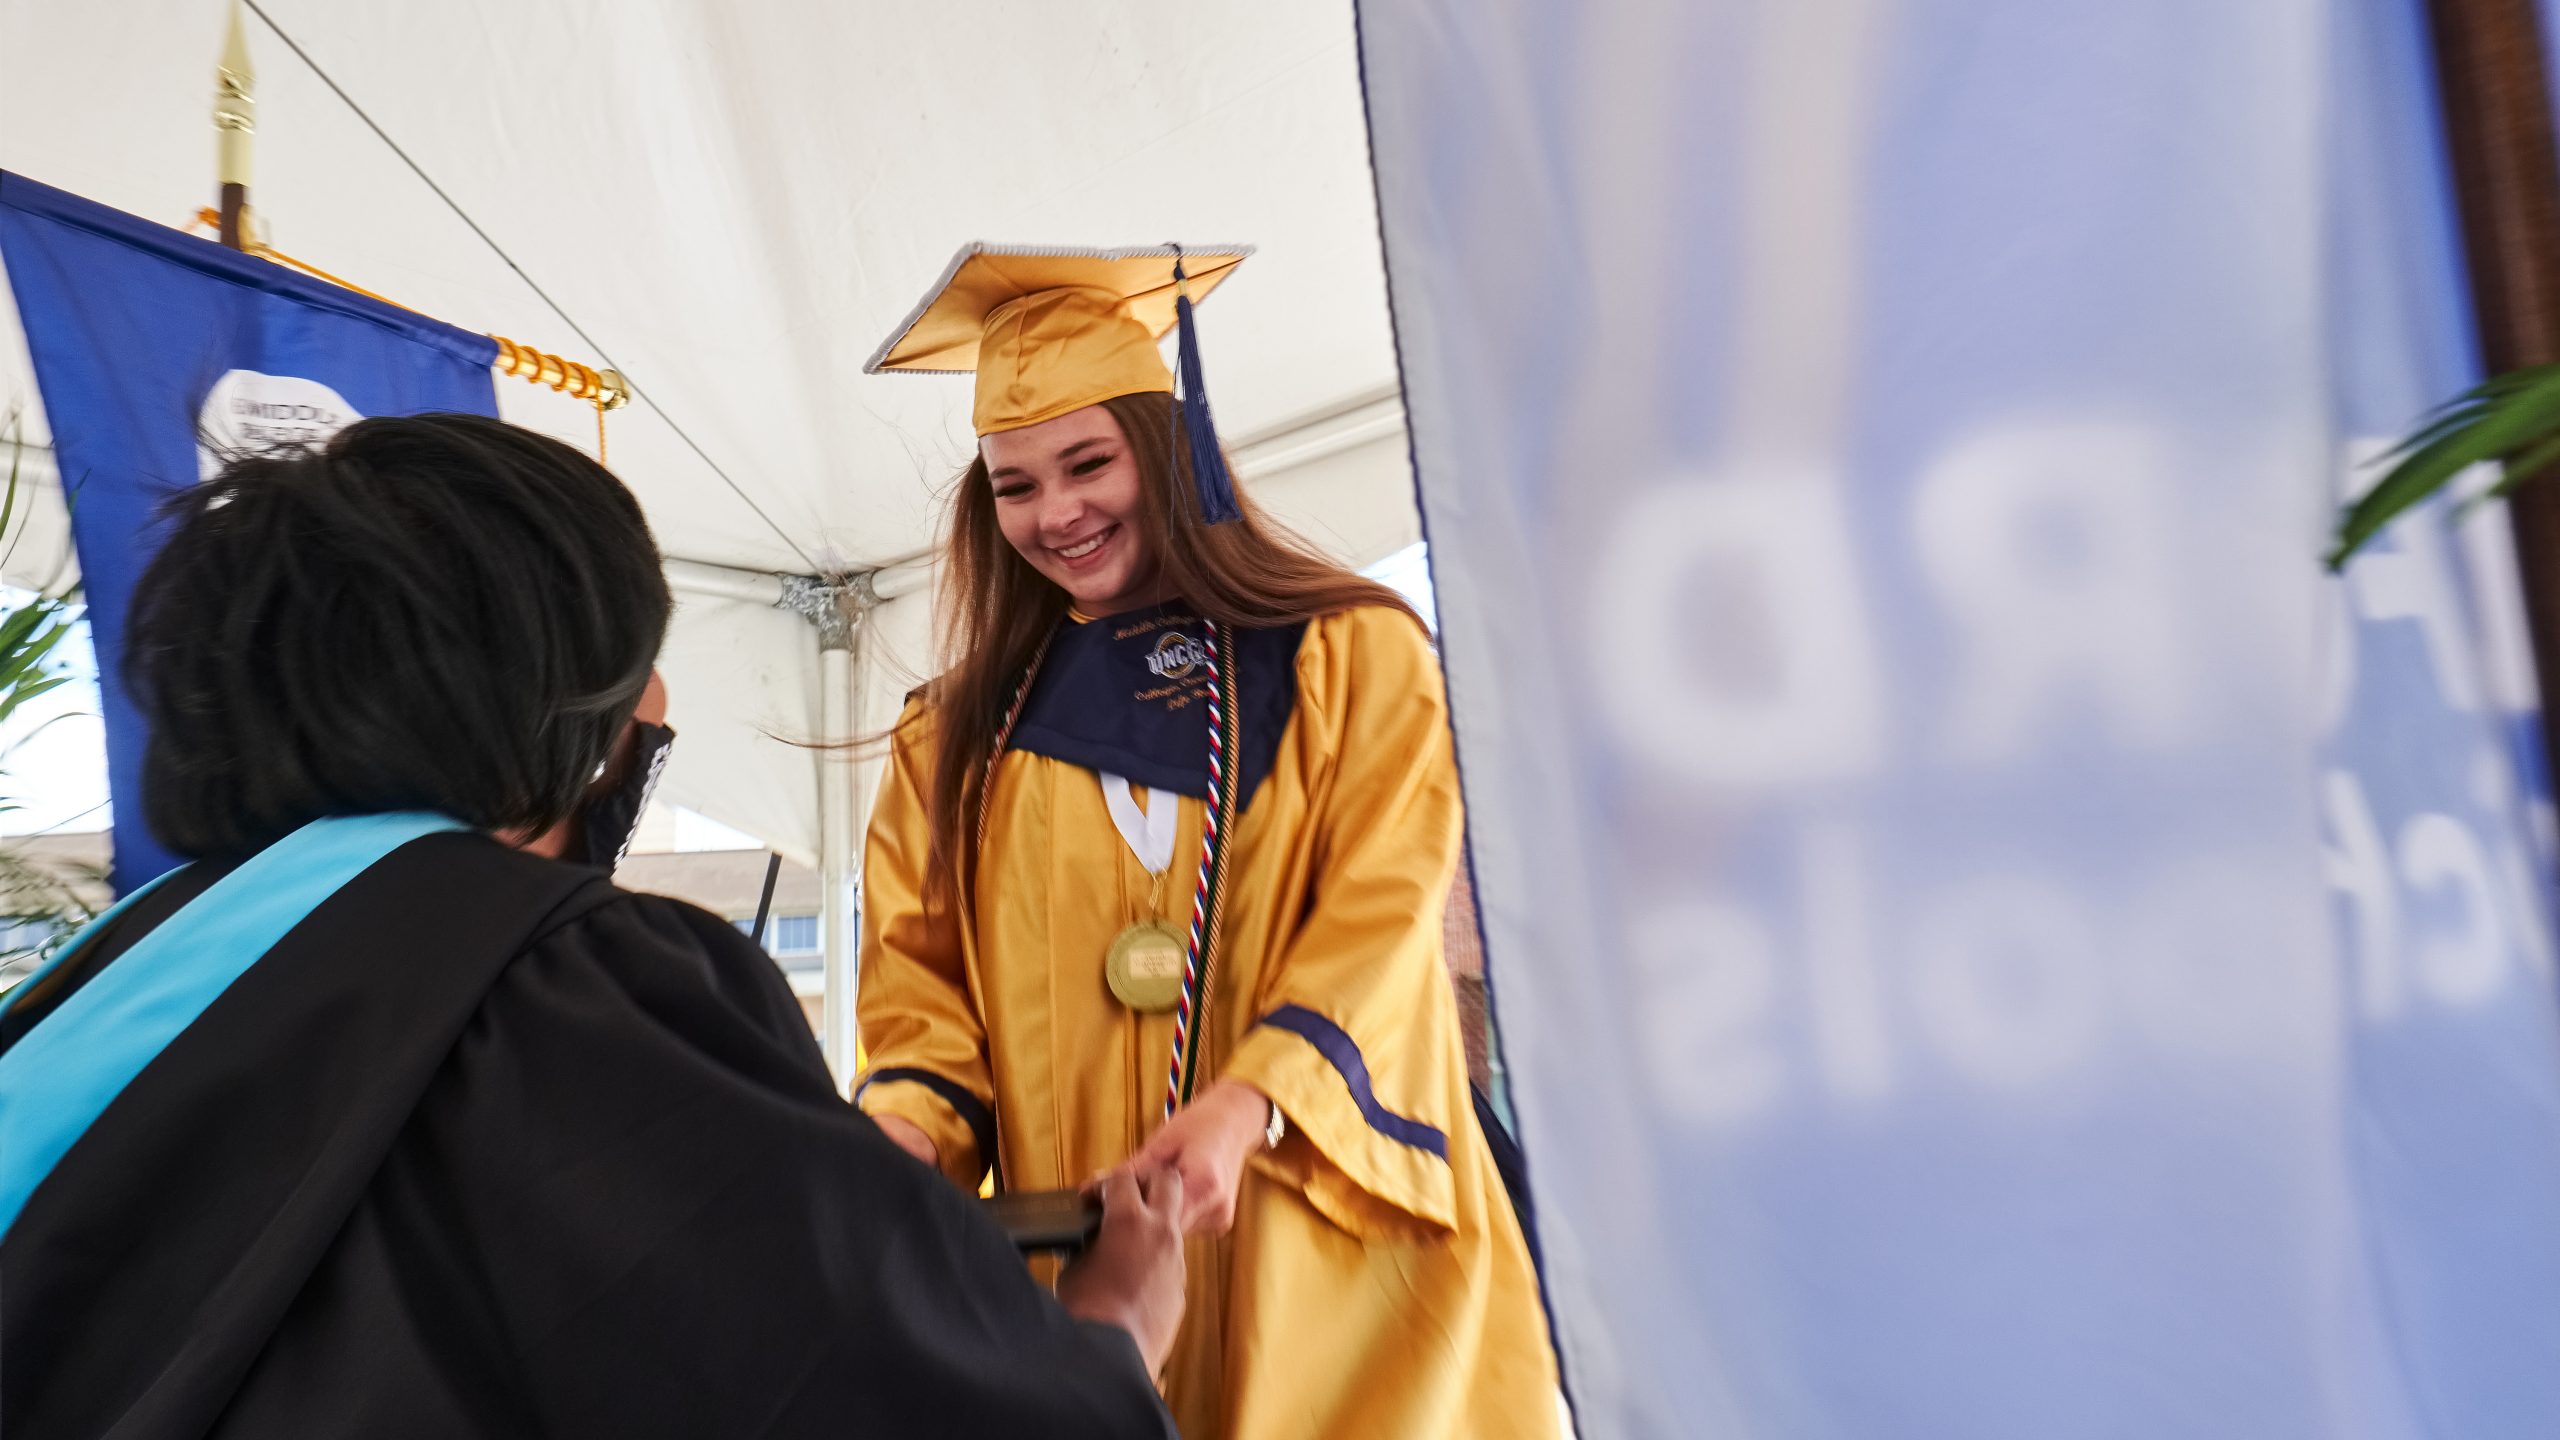 UNCG Middle College graduation in 2020 – girl receives diploma